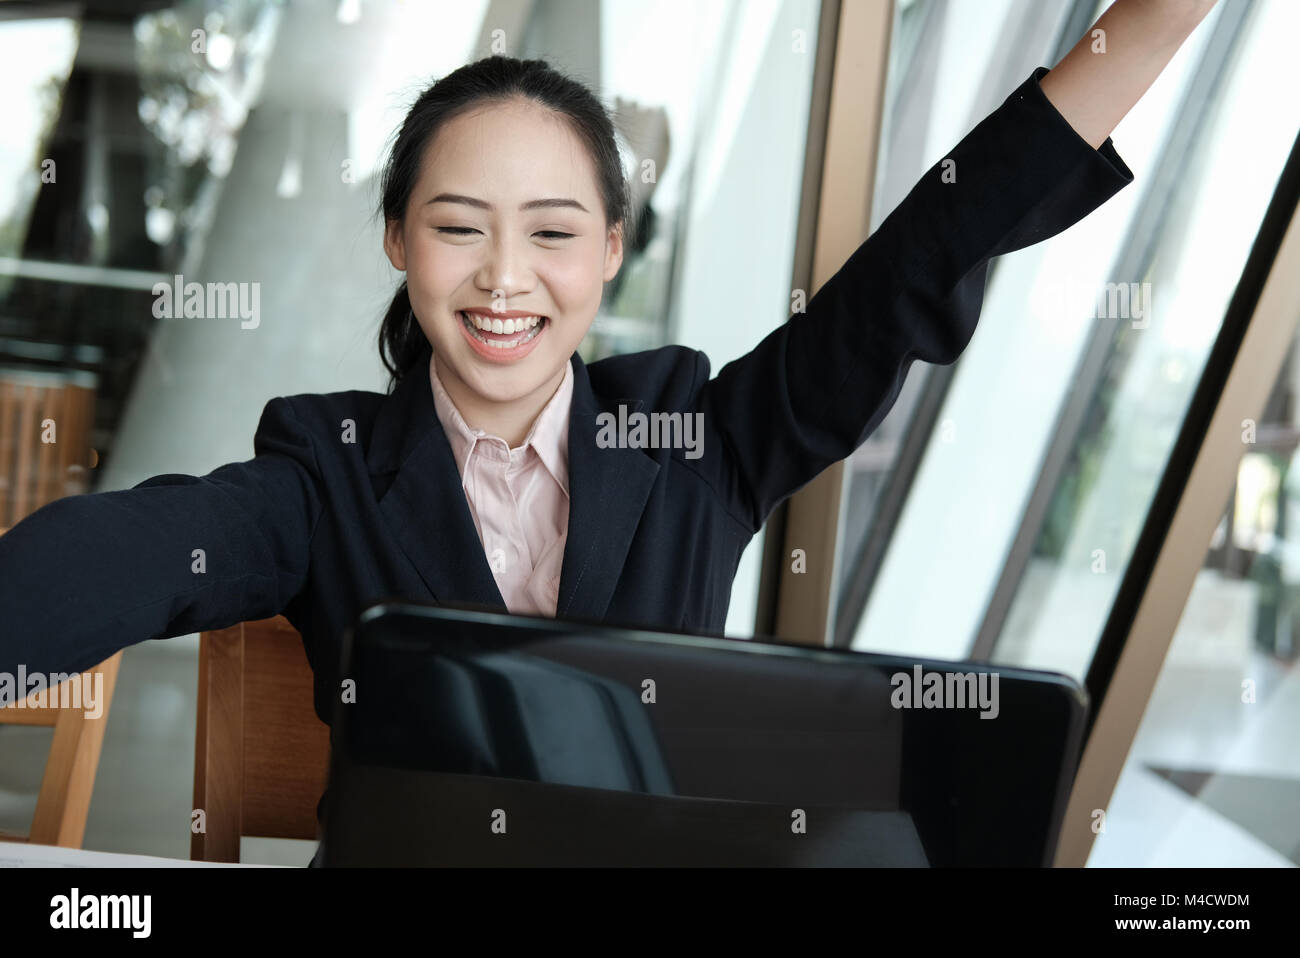 businesswoman raise hands with happiness for successful project. cheerful woman showing gladness for achievement Stock Photo